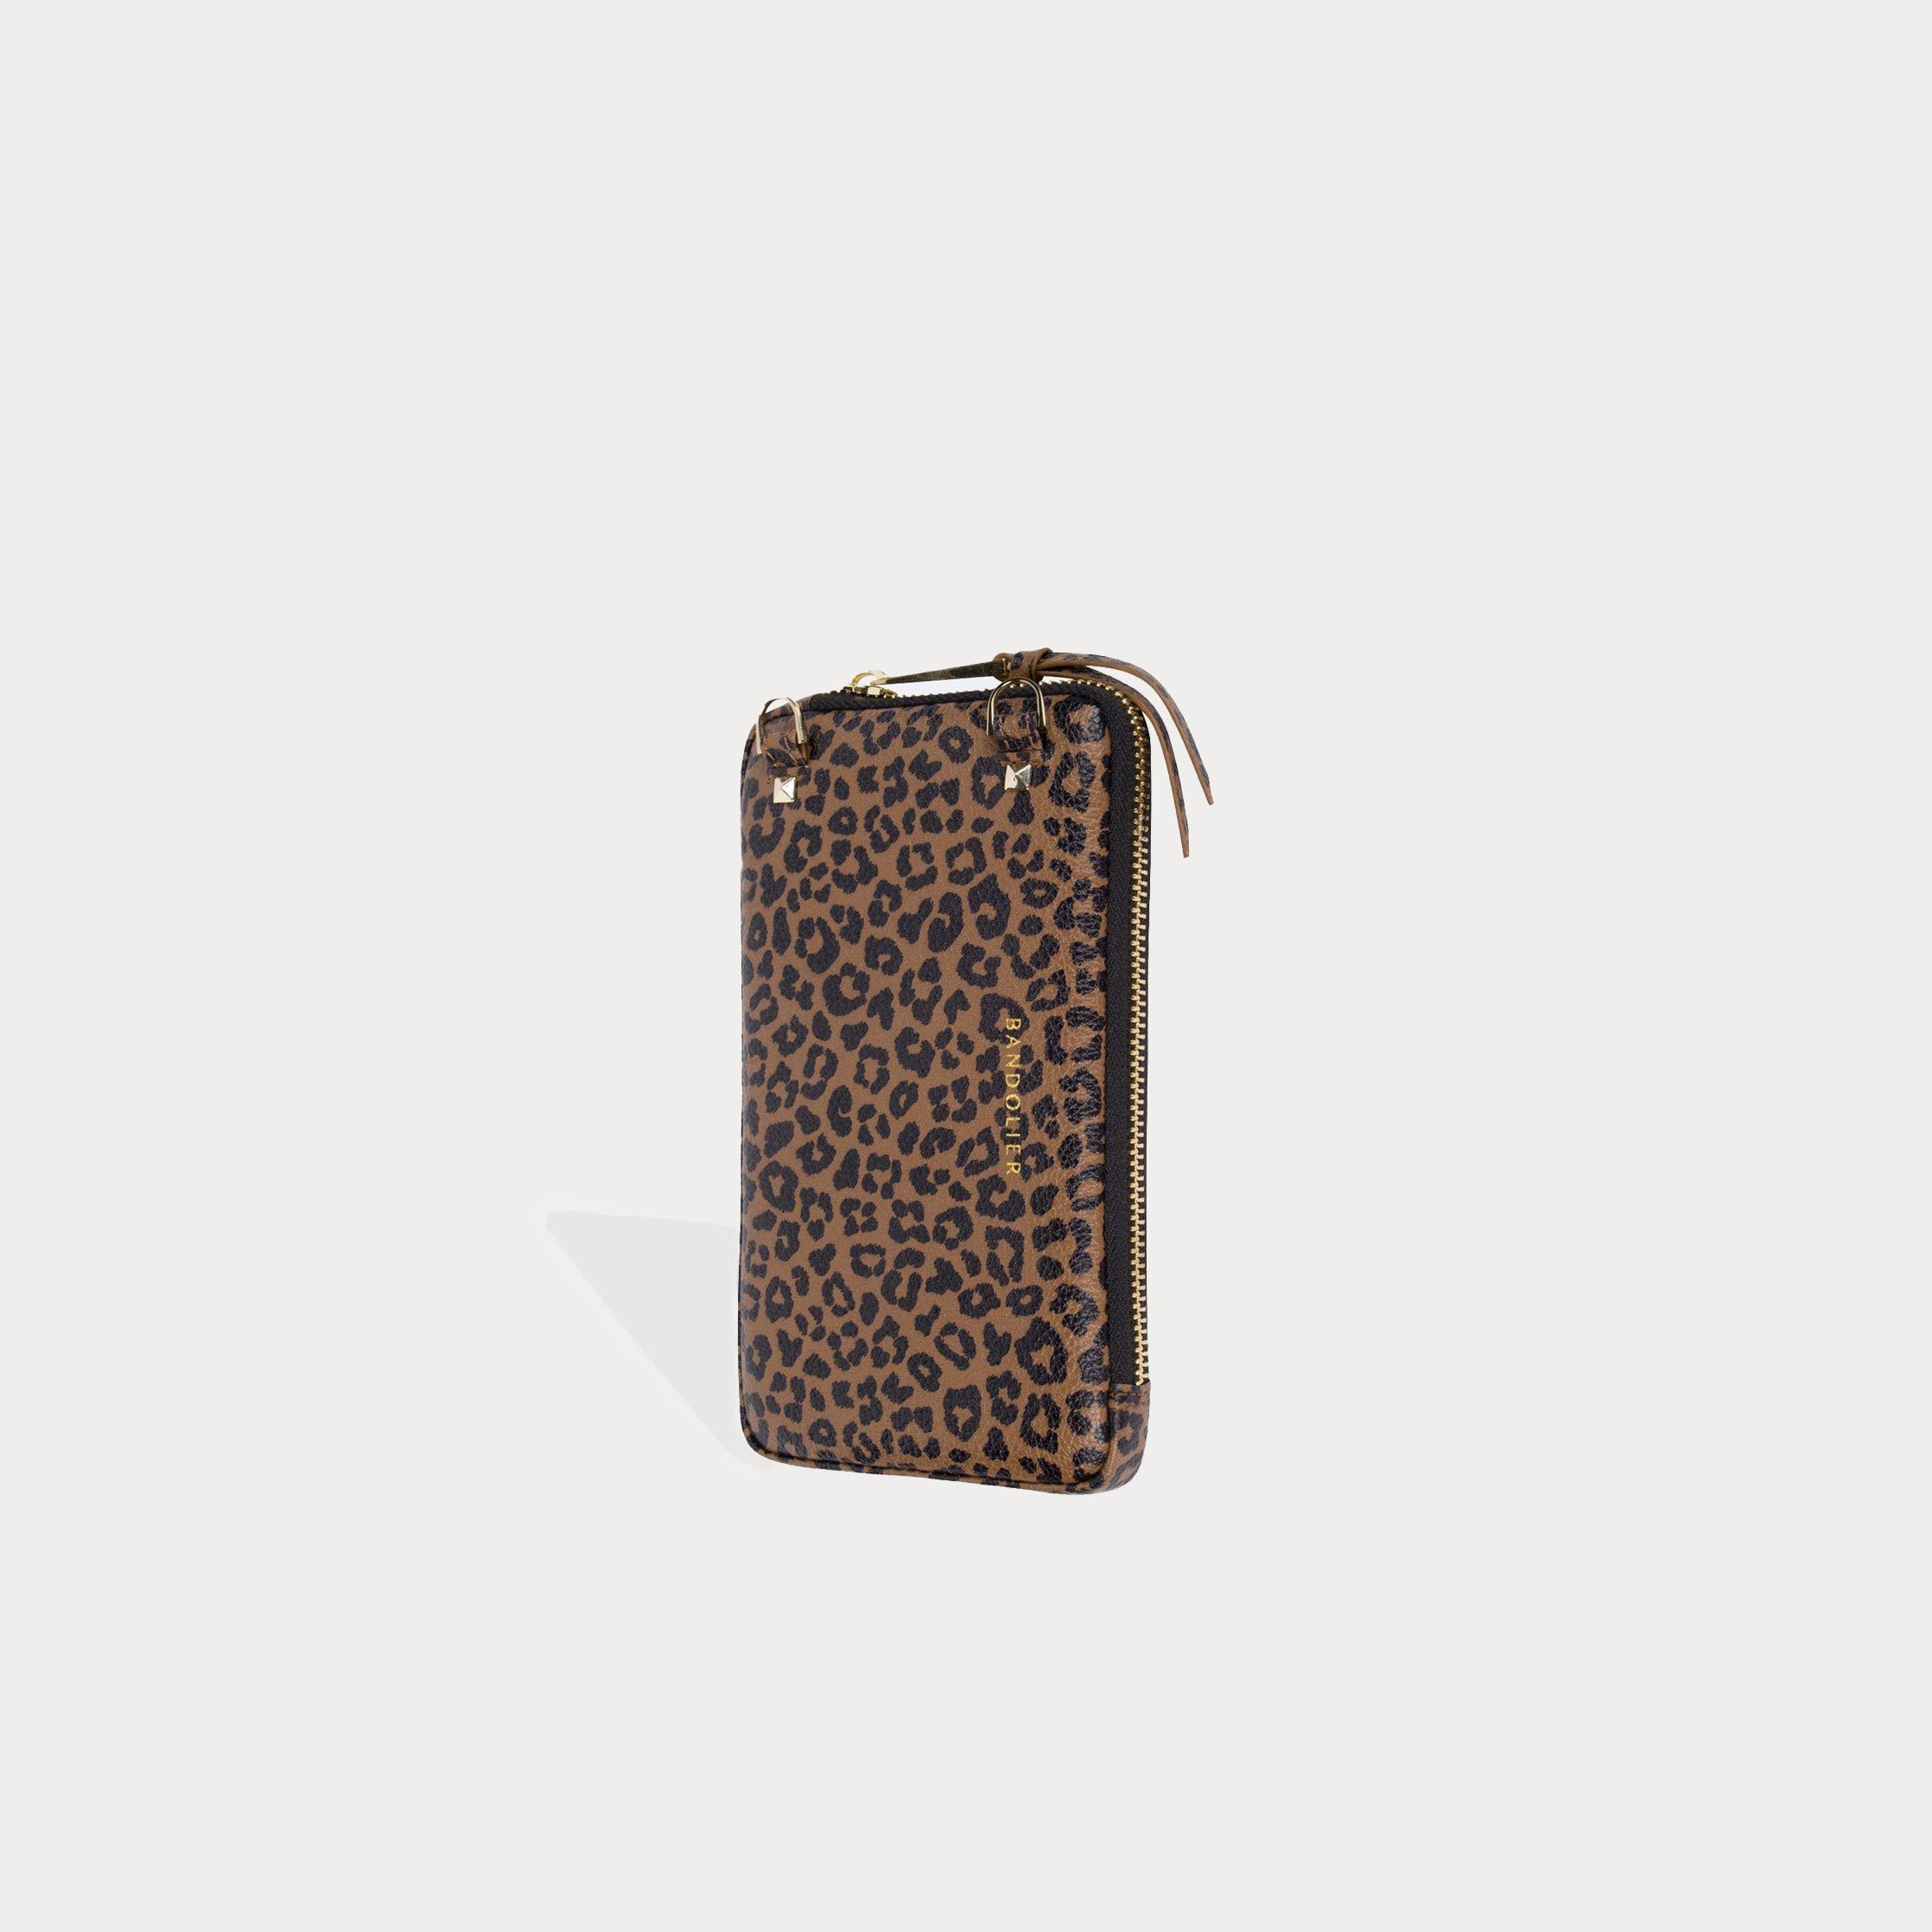 1_Pebble-Leather-Expanded-Zip-Pouch---Dark-Leopard-Gold.jpg